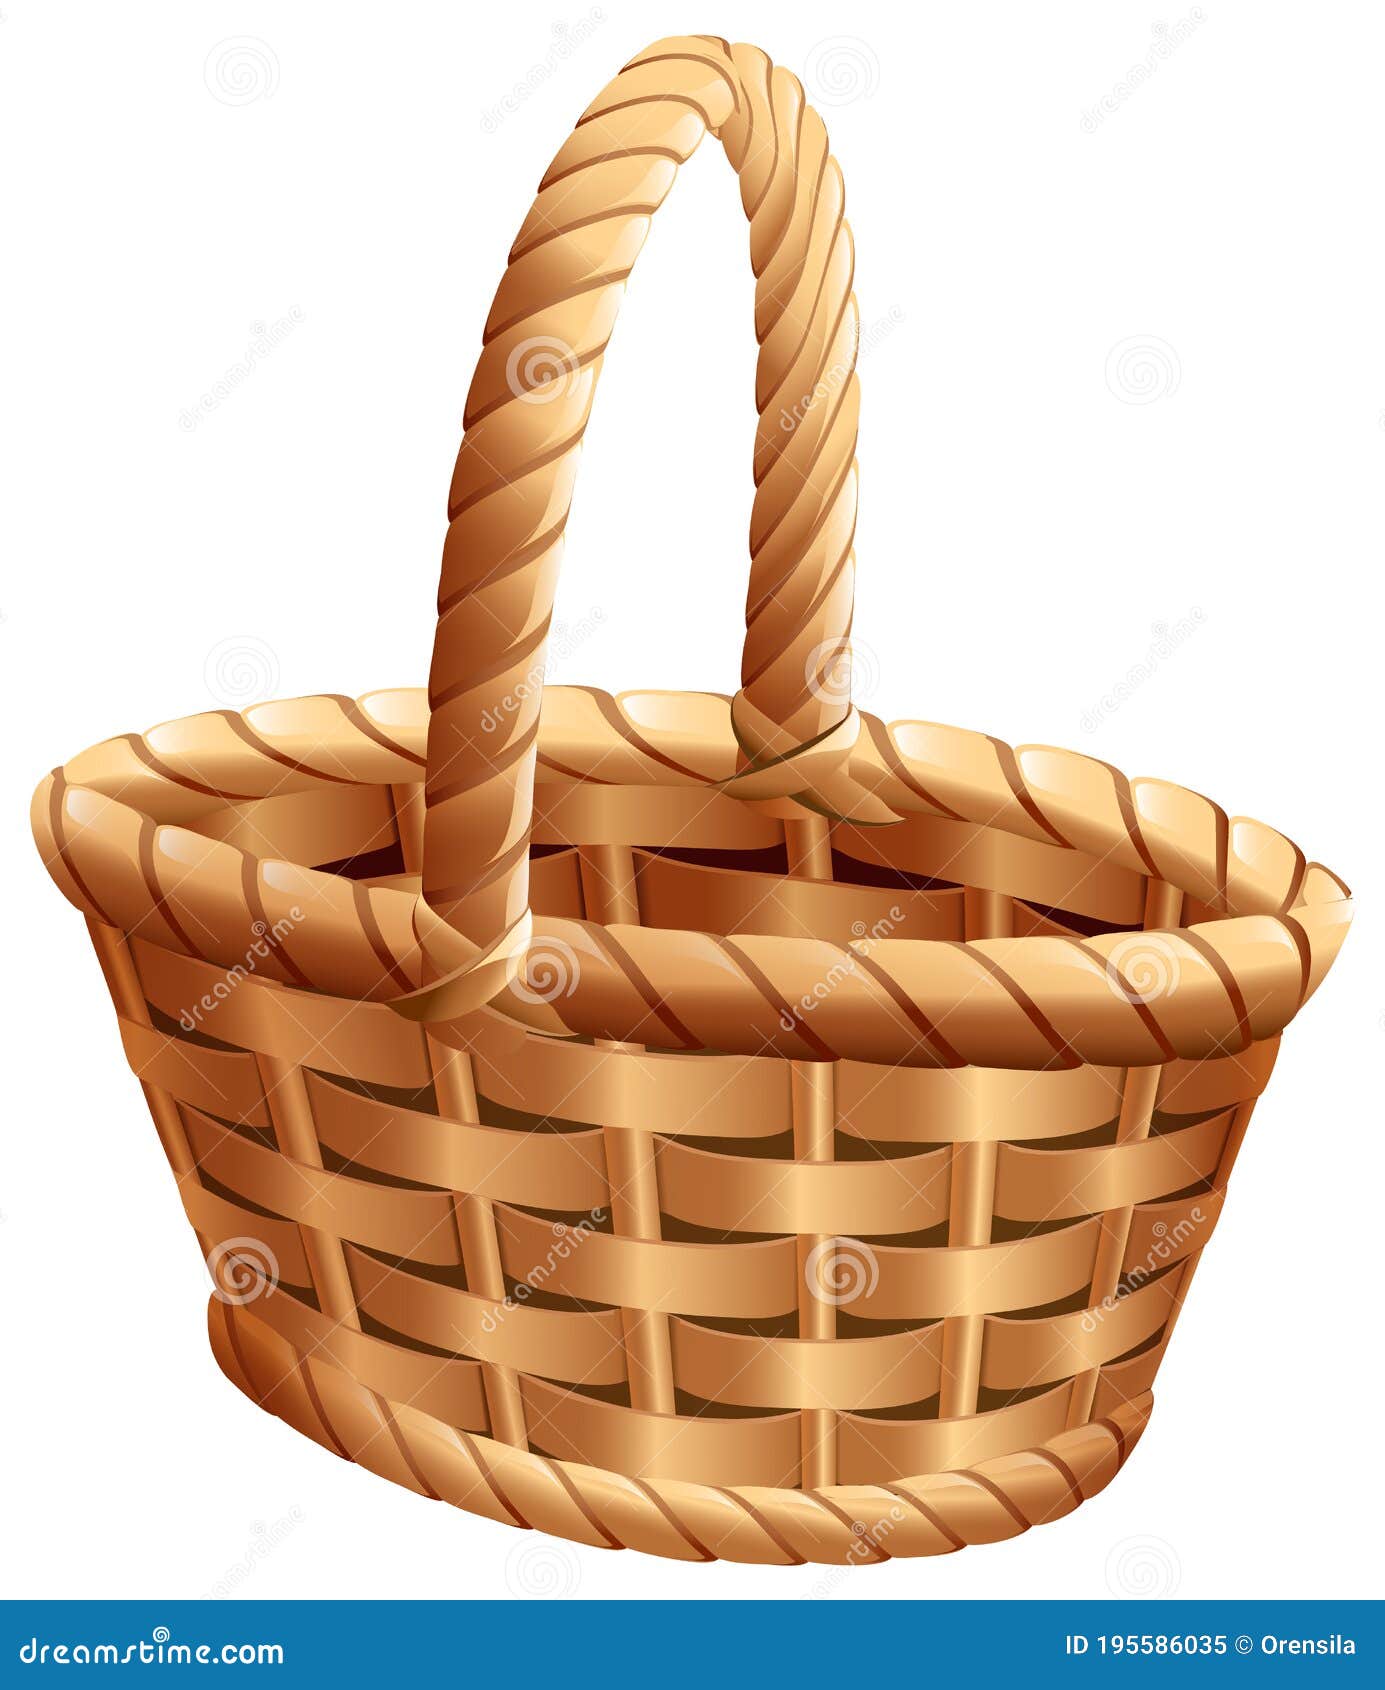 Empty Wicker Basket with Handle for Thanksgiving Day Harvest Celebration  Stock Vector - Illustration of wicker, vector: 195586035